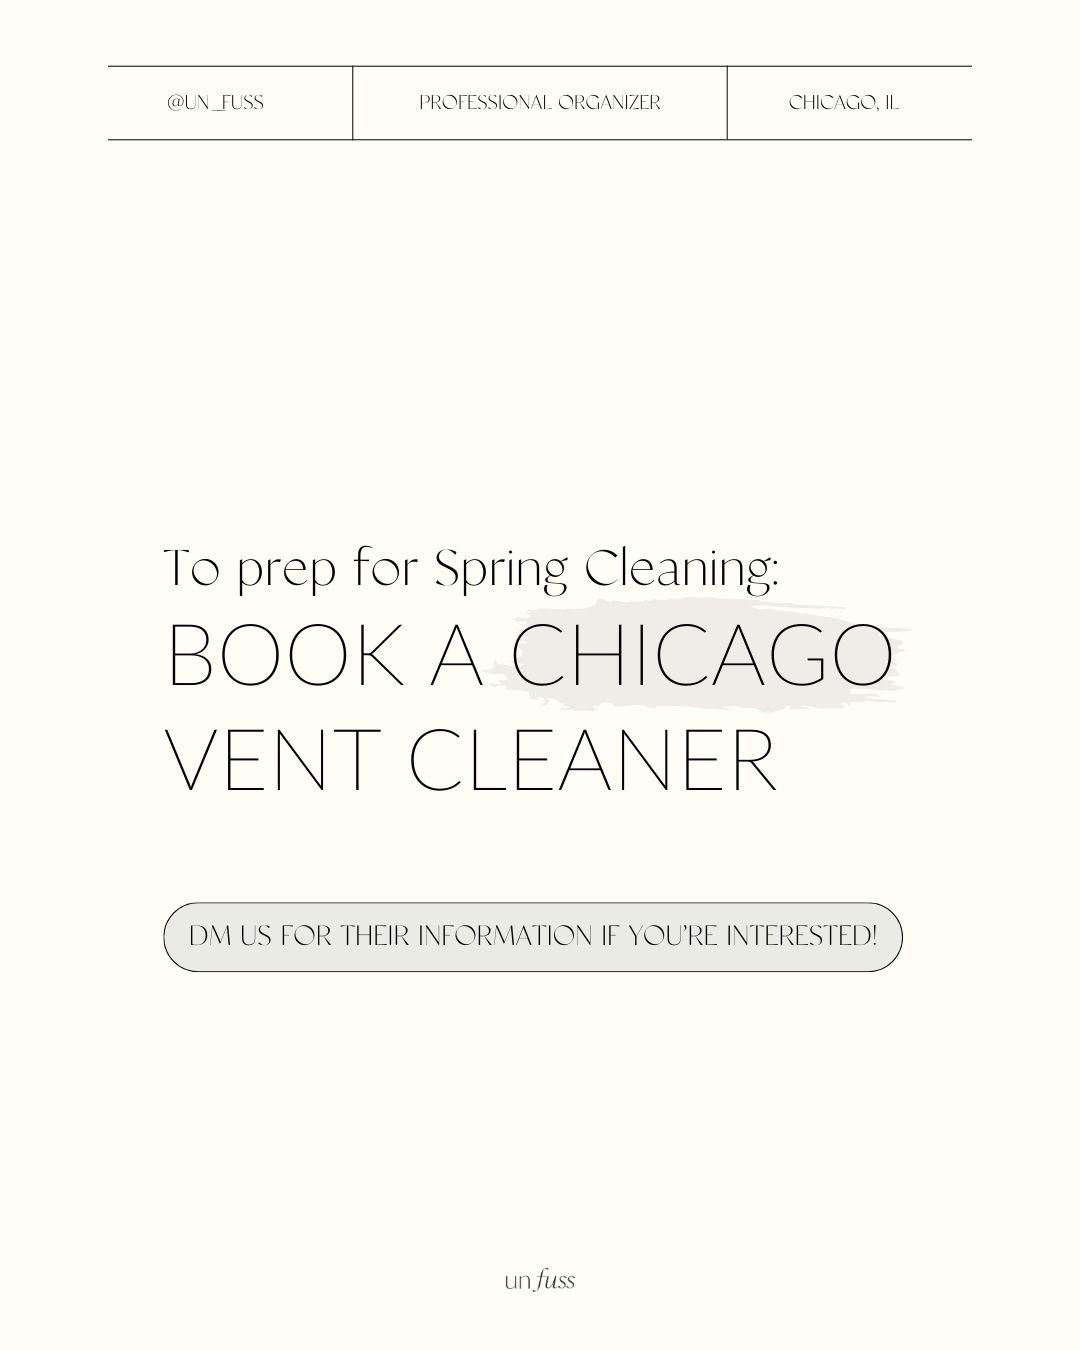 ATTENTION CHICAGO AREA: If you're looking for a vent cleaner, Unfuss has you covered. 🤝

While working in the professional organizing industry for 8+ years in the Chicago area, we've made quite a few connections with local businesses that we'd love 